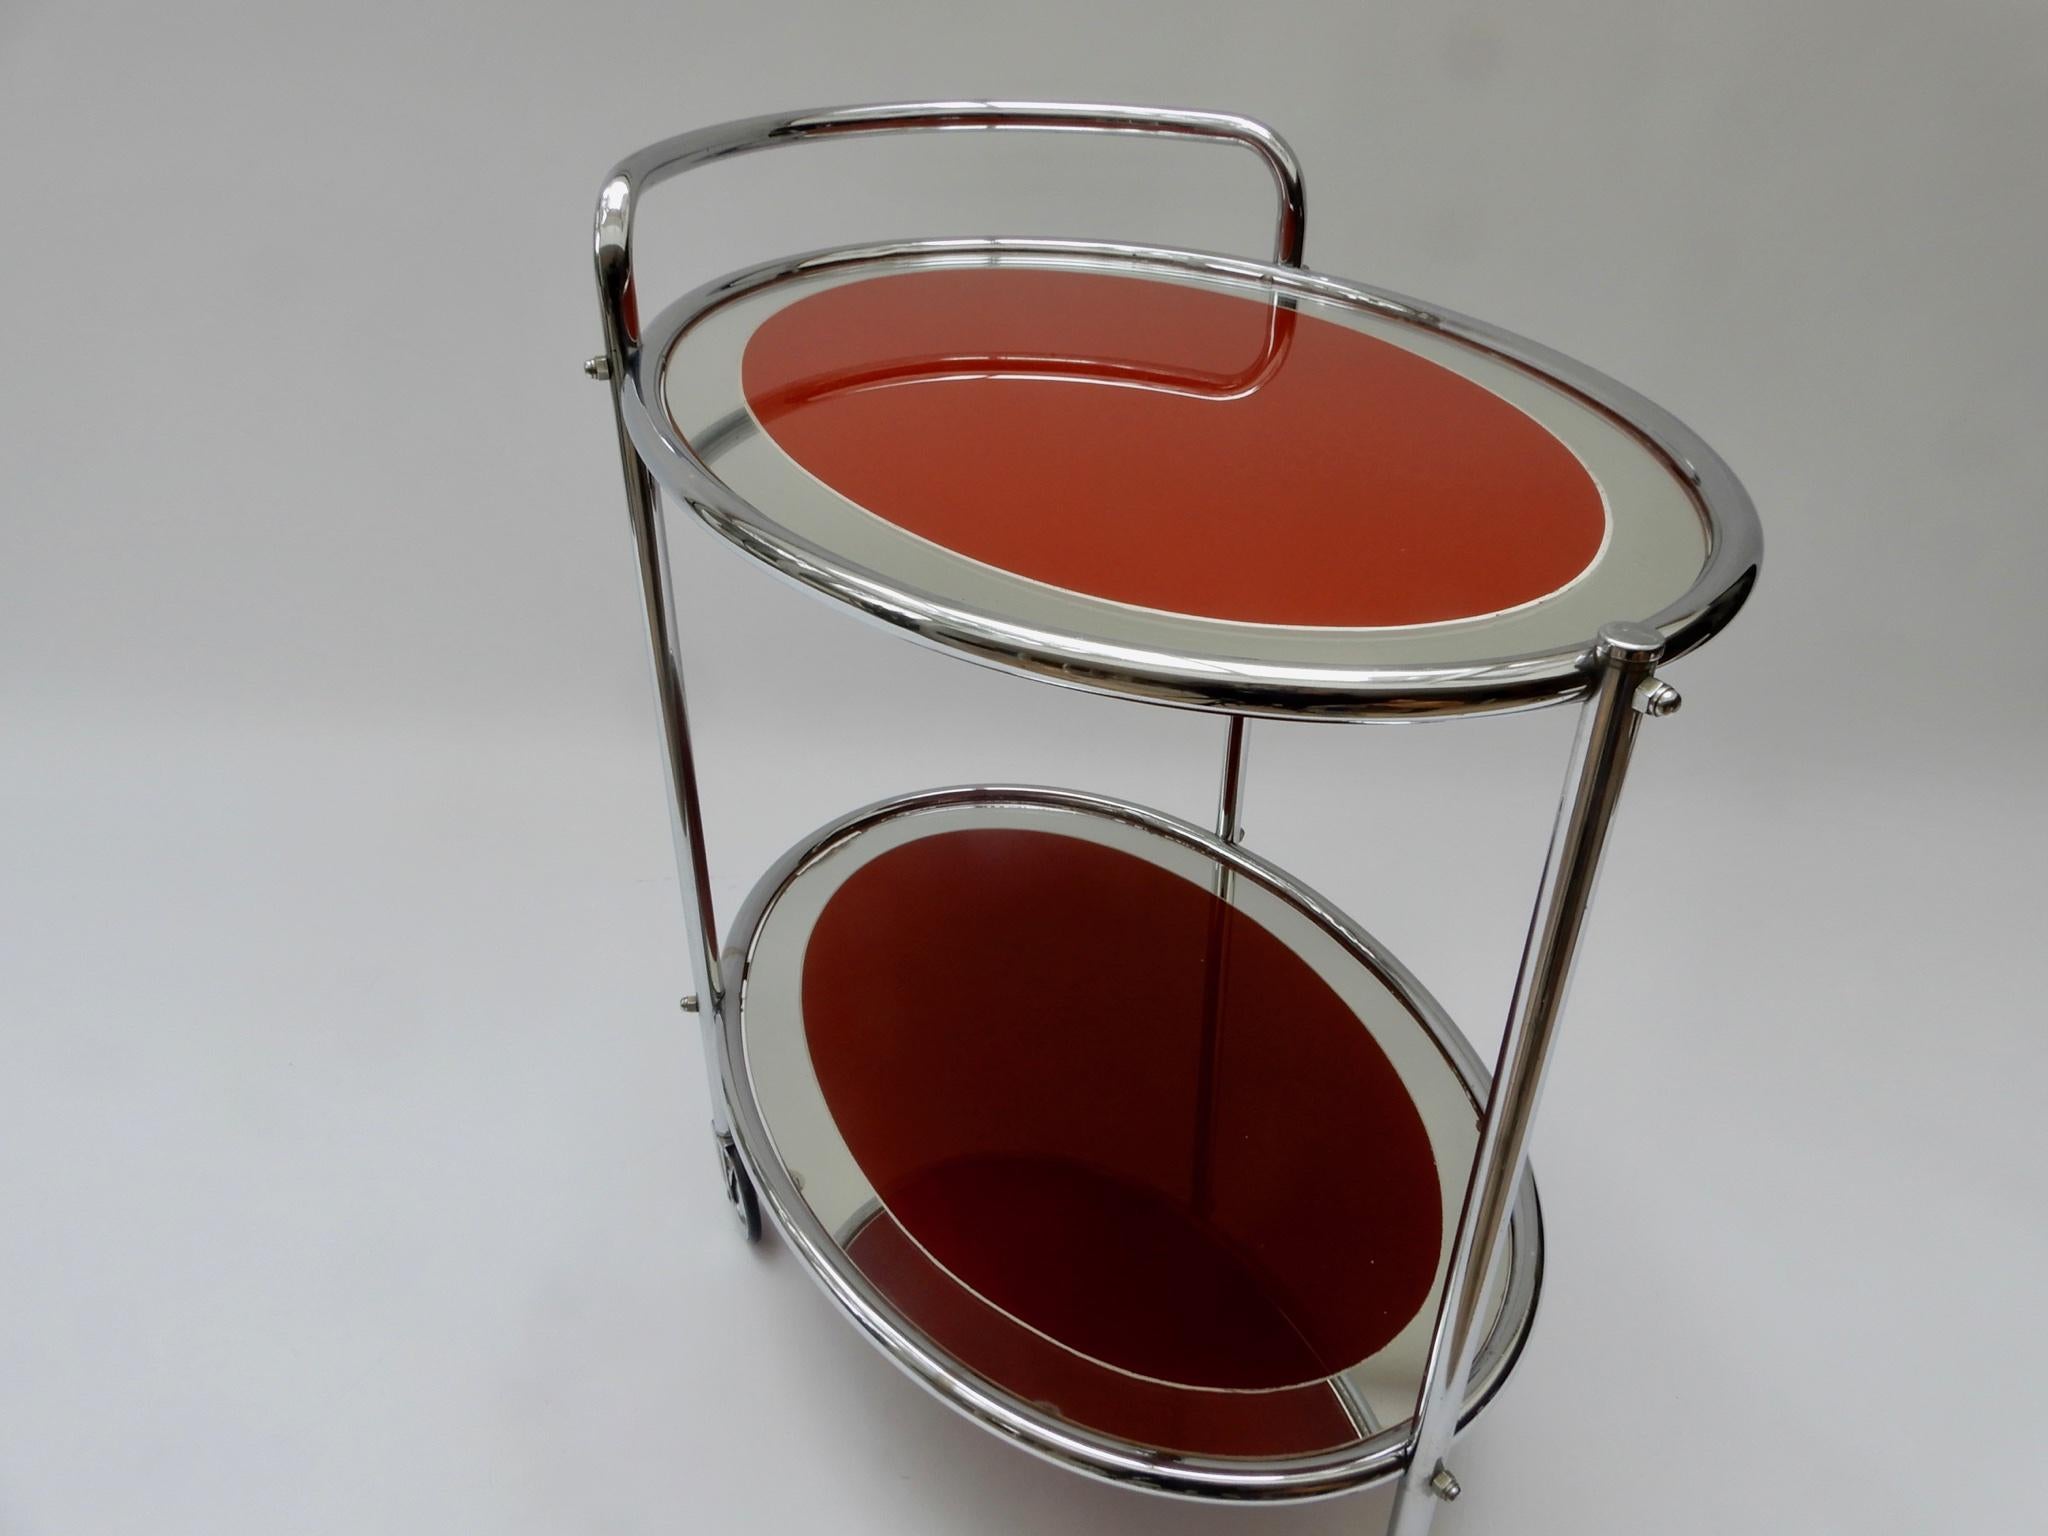 Oval Chrome and Rust Glass Mirrored Bar Cart, 1950s For Sale 1